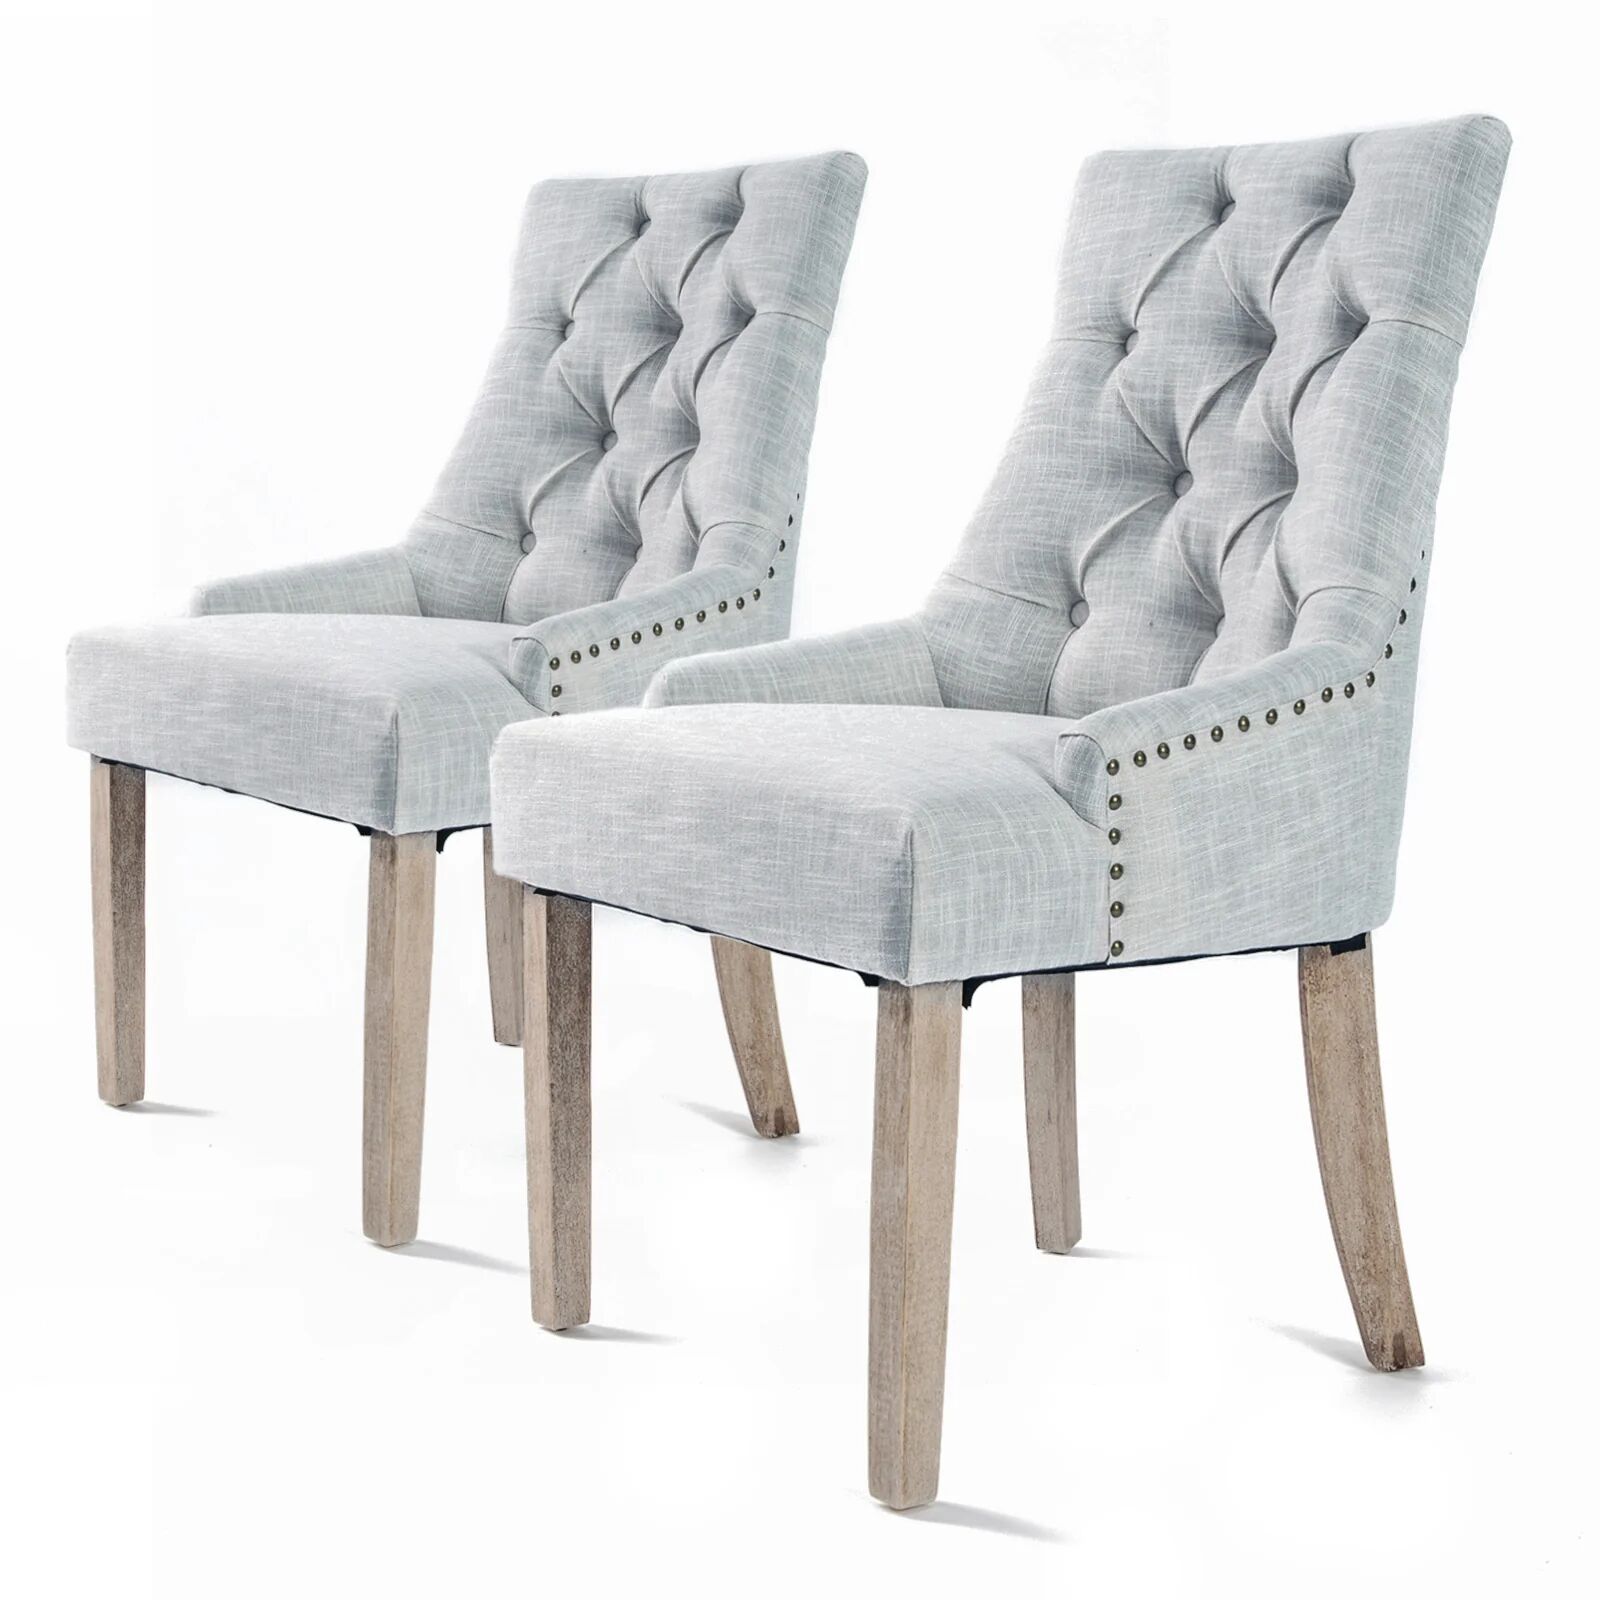 Unbranded 2X French Provincial Oak Leg Chair AMOUR - GREY